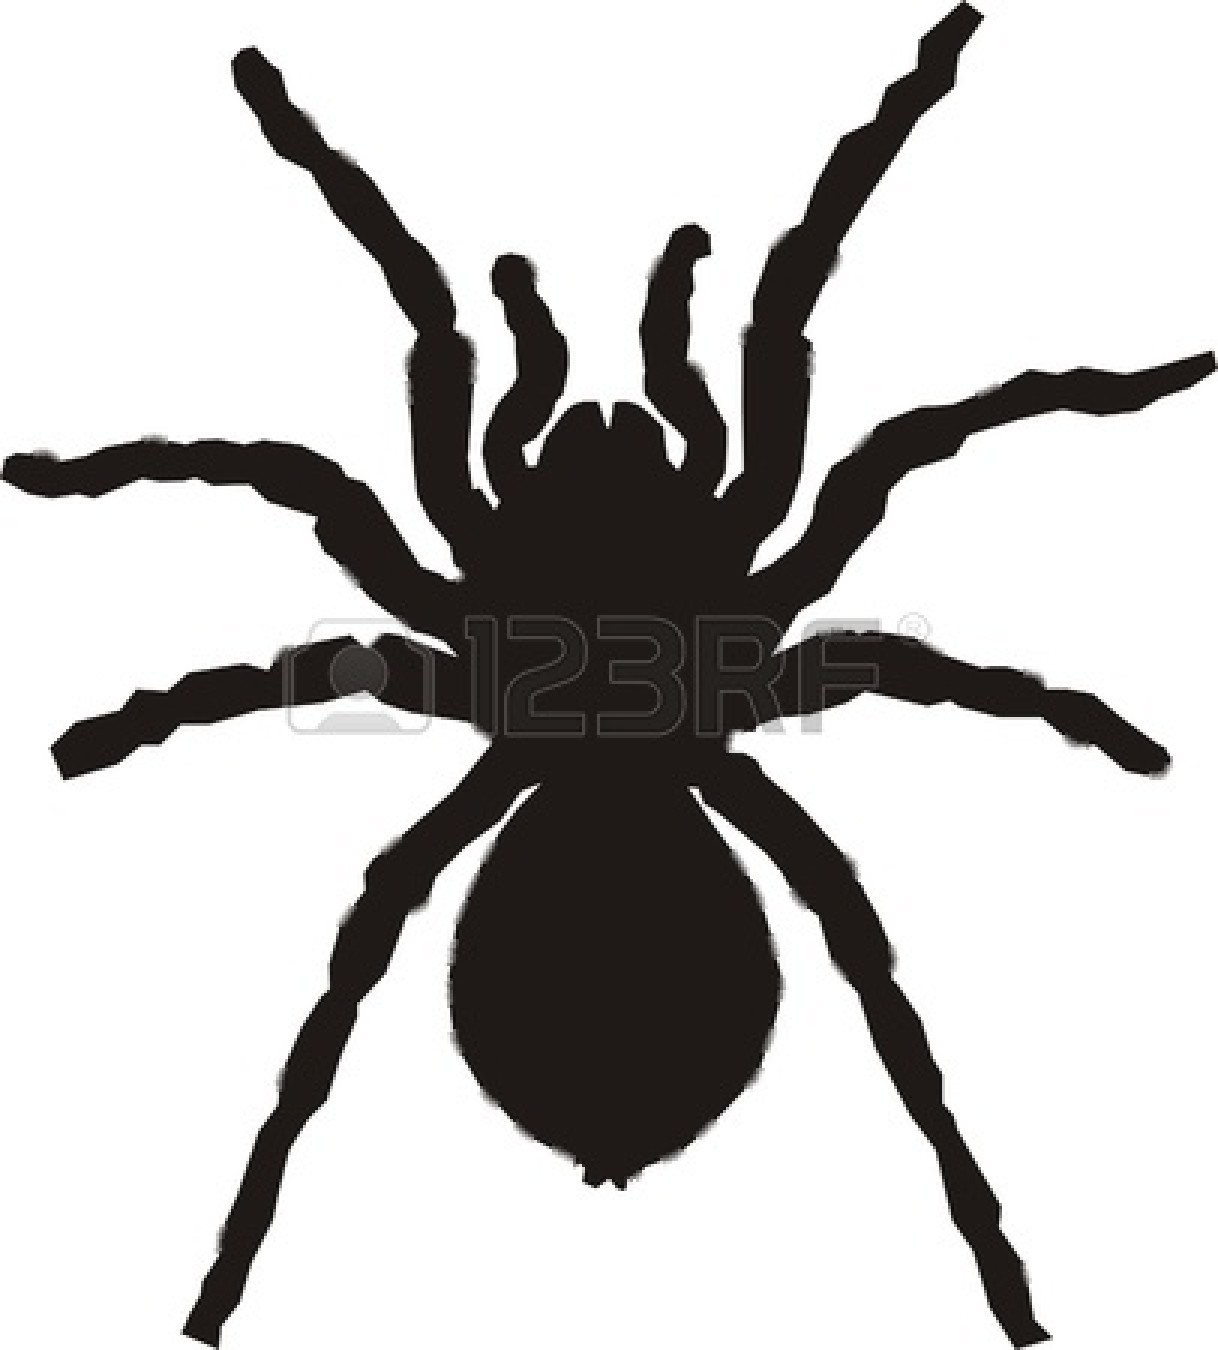 Hanging Spider Silhouette   Clipart Panda   Free Clipart Images